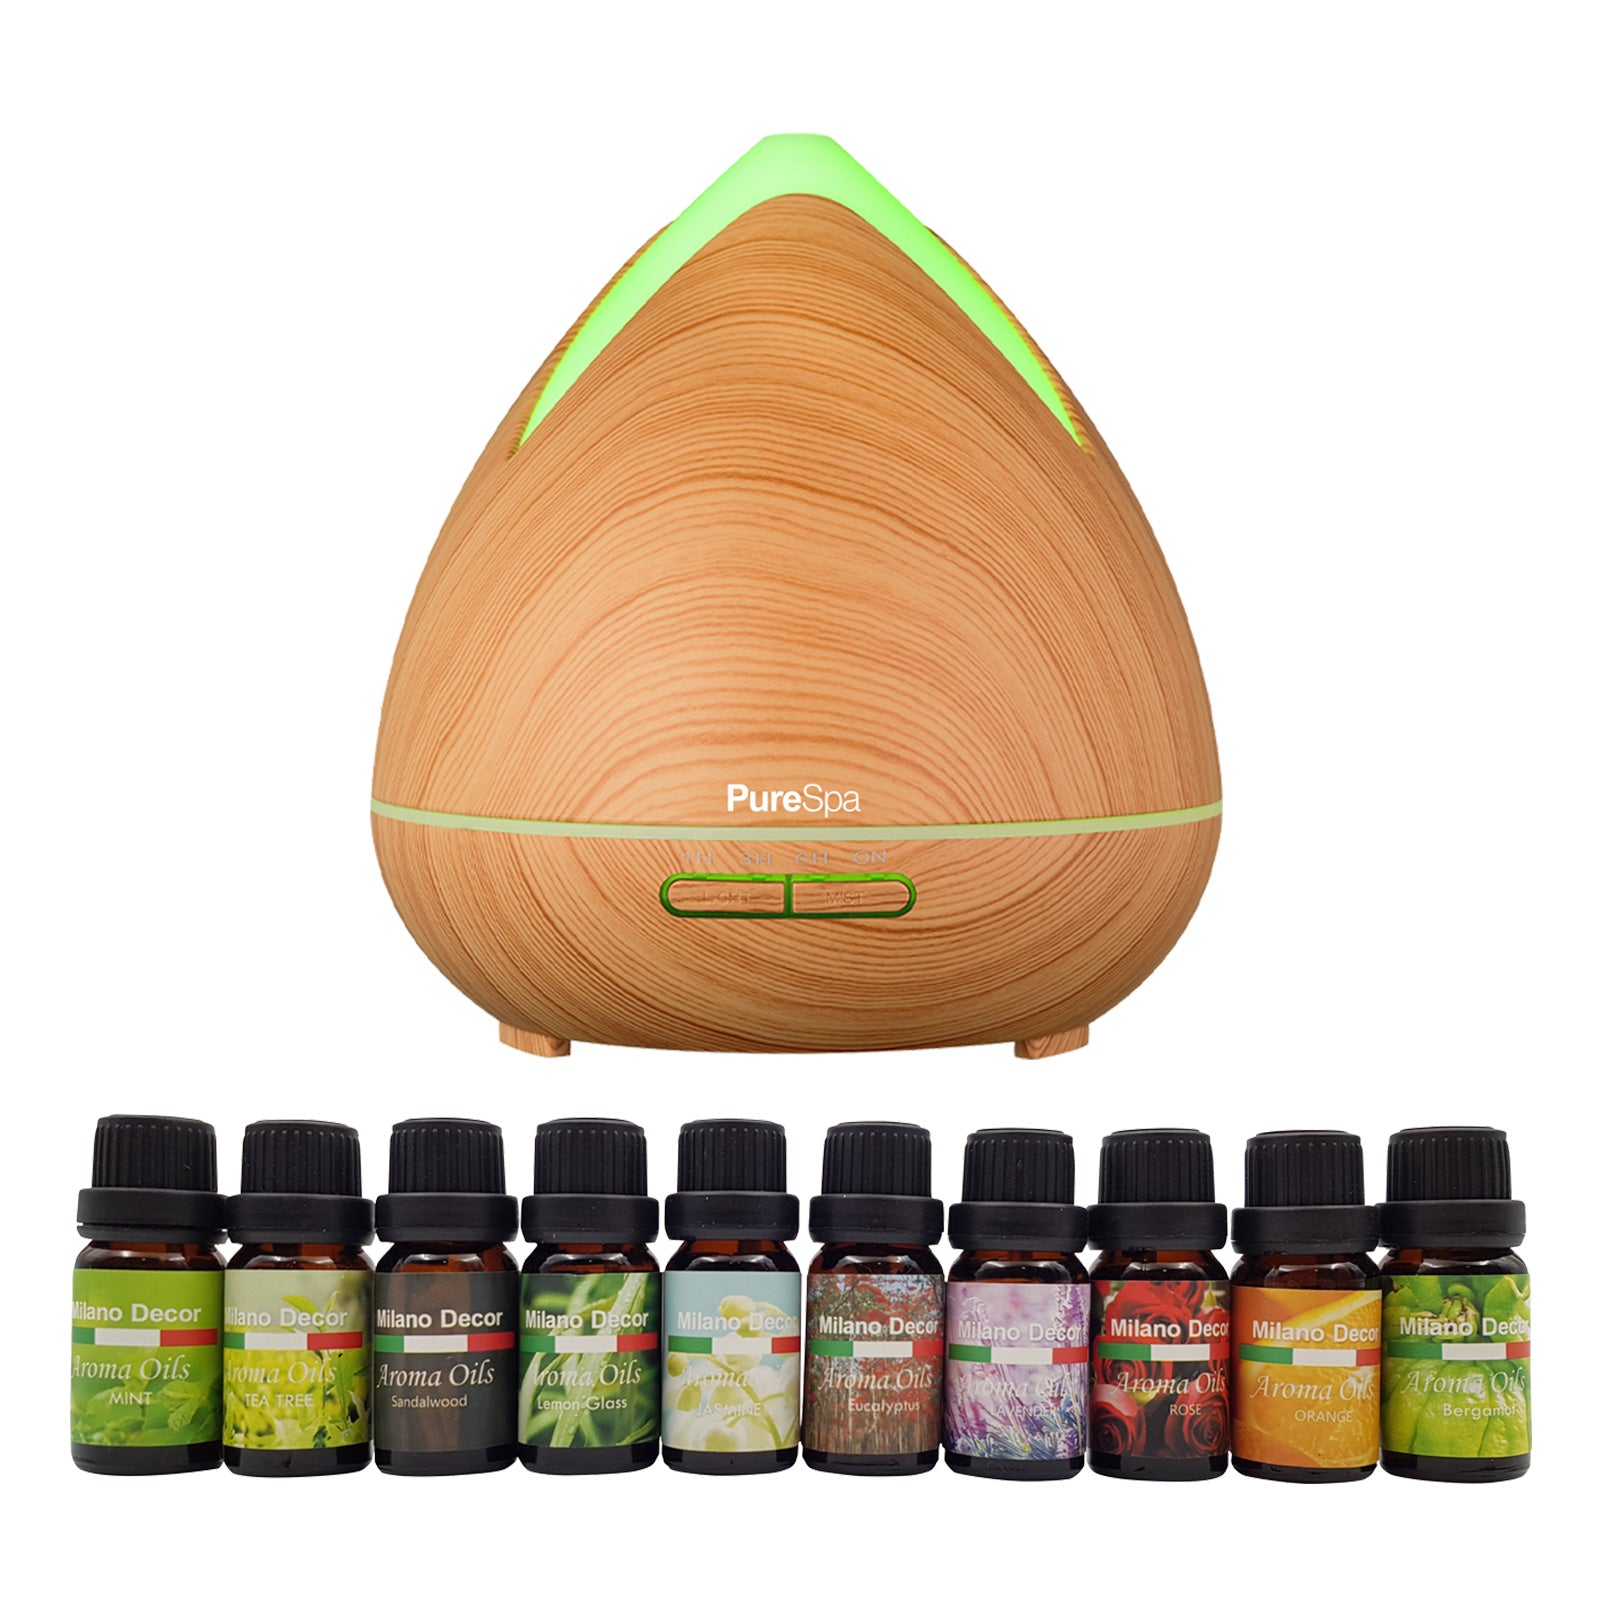 Purespa Diffuser Set With 10 Pack Diffuser Oils Humidifier Aromatherapy - Light Wood - SILBERSHELL